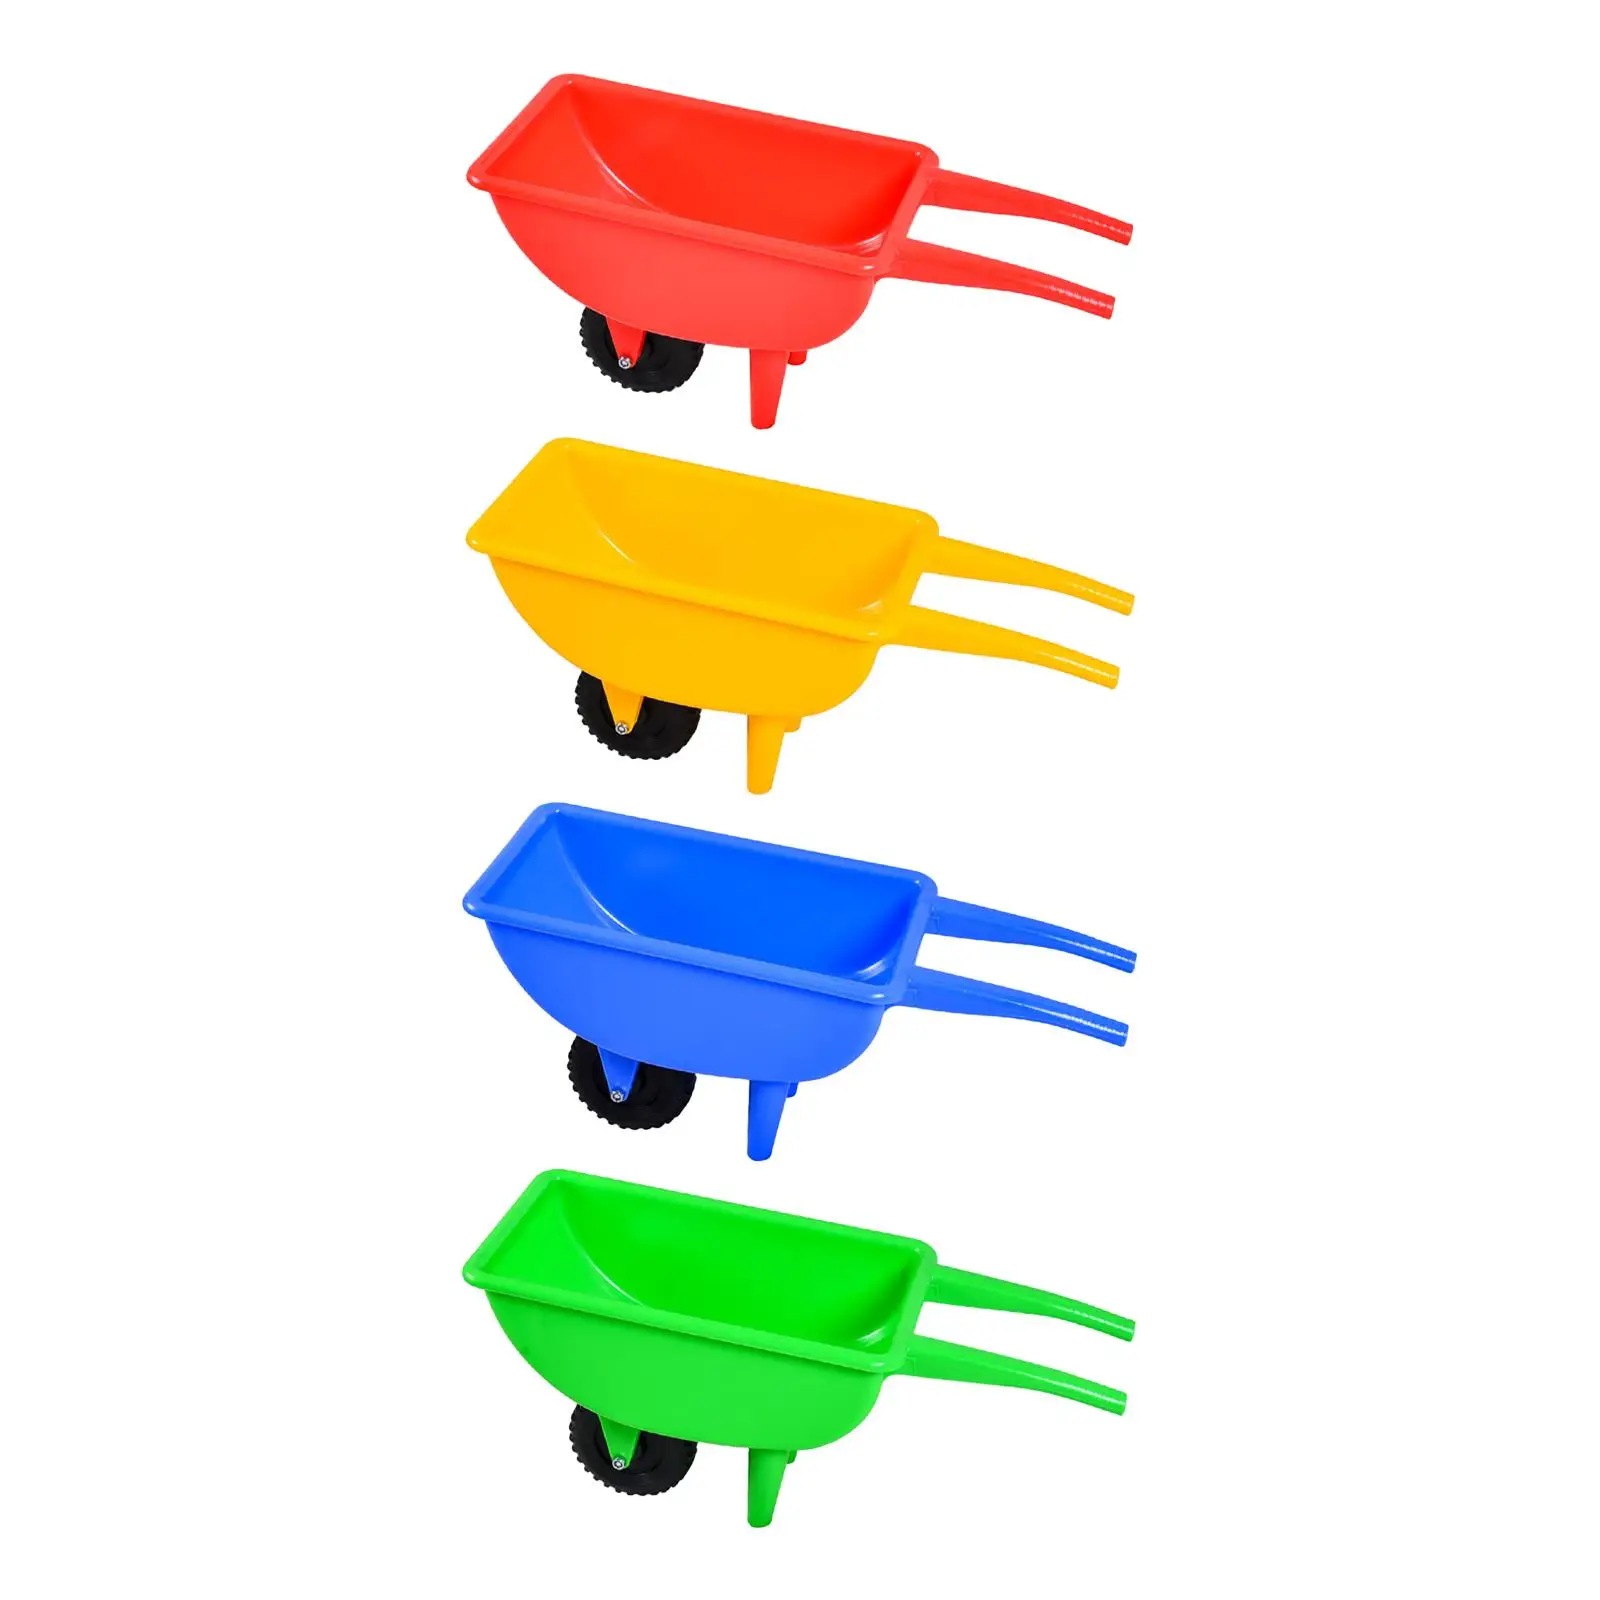 

Sand Toy Wheelbarrow Yard Lightweight Educational Balance Car with Single Wheel for Kids Children Ages 2 Years Old up Girls Boys